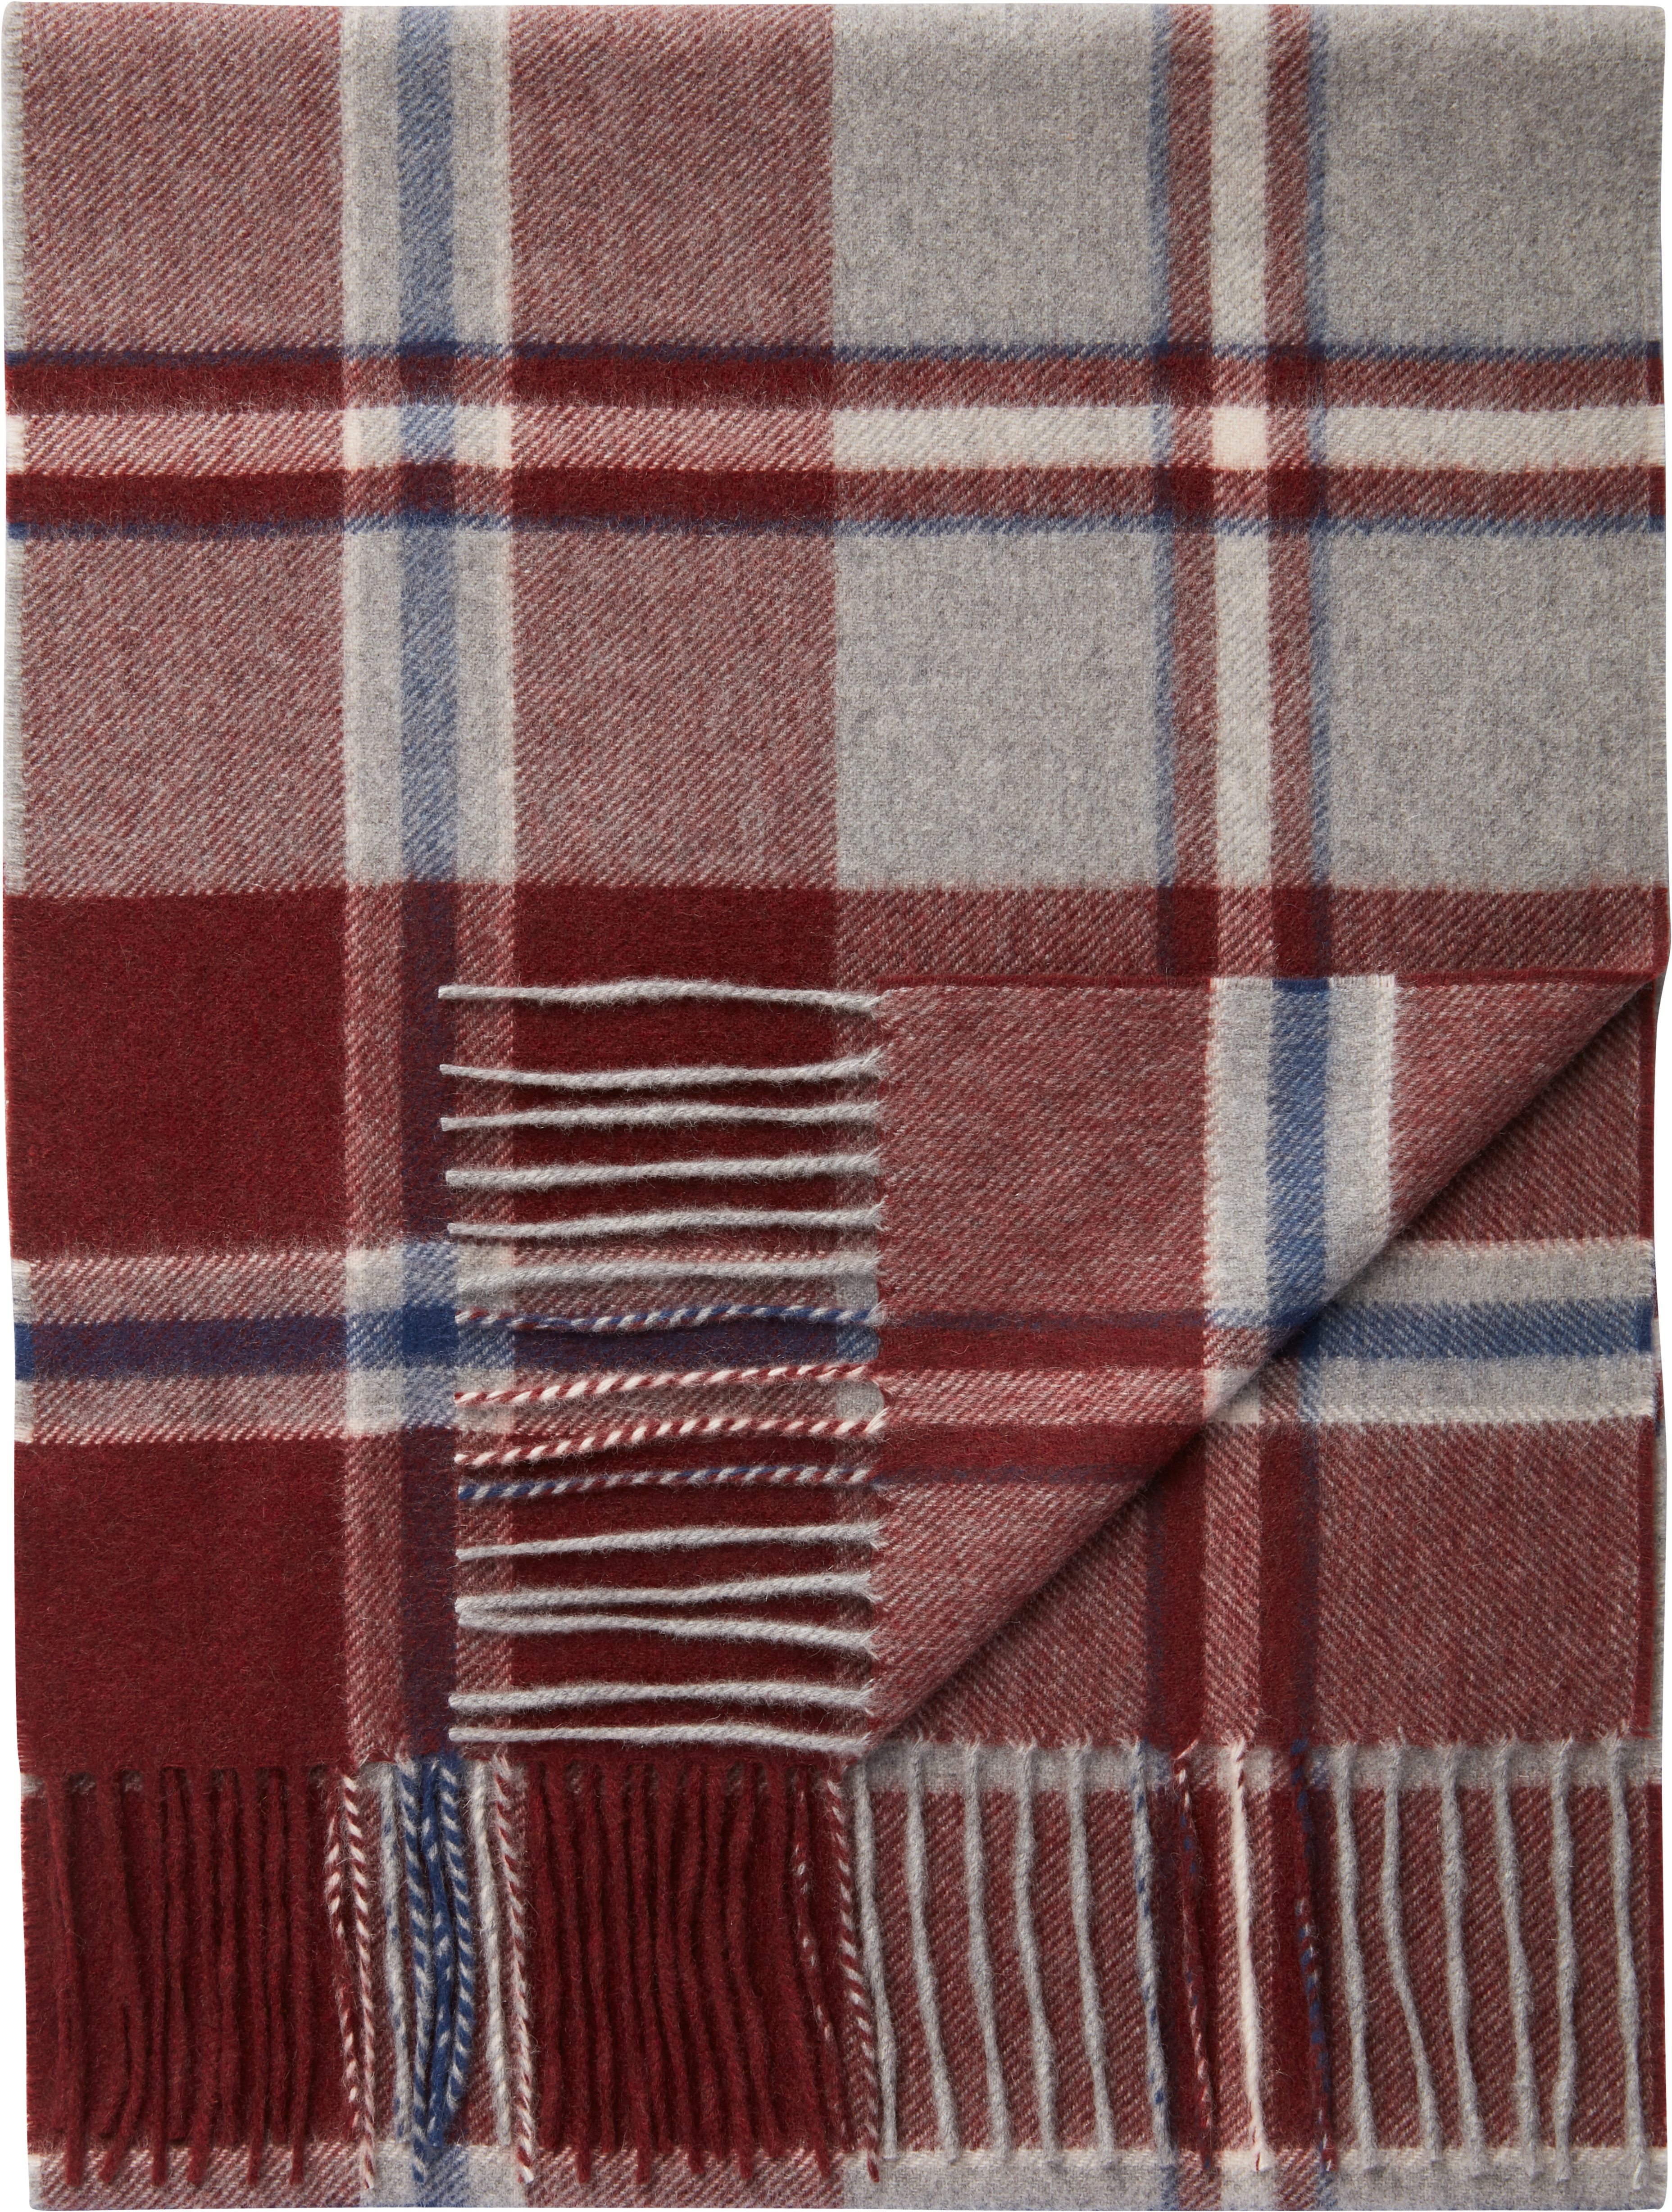 Bank Plaid Cashmere Scarf CLEARANCE 